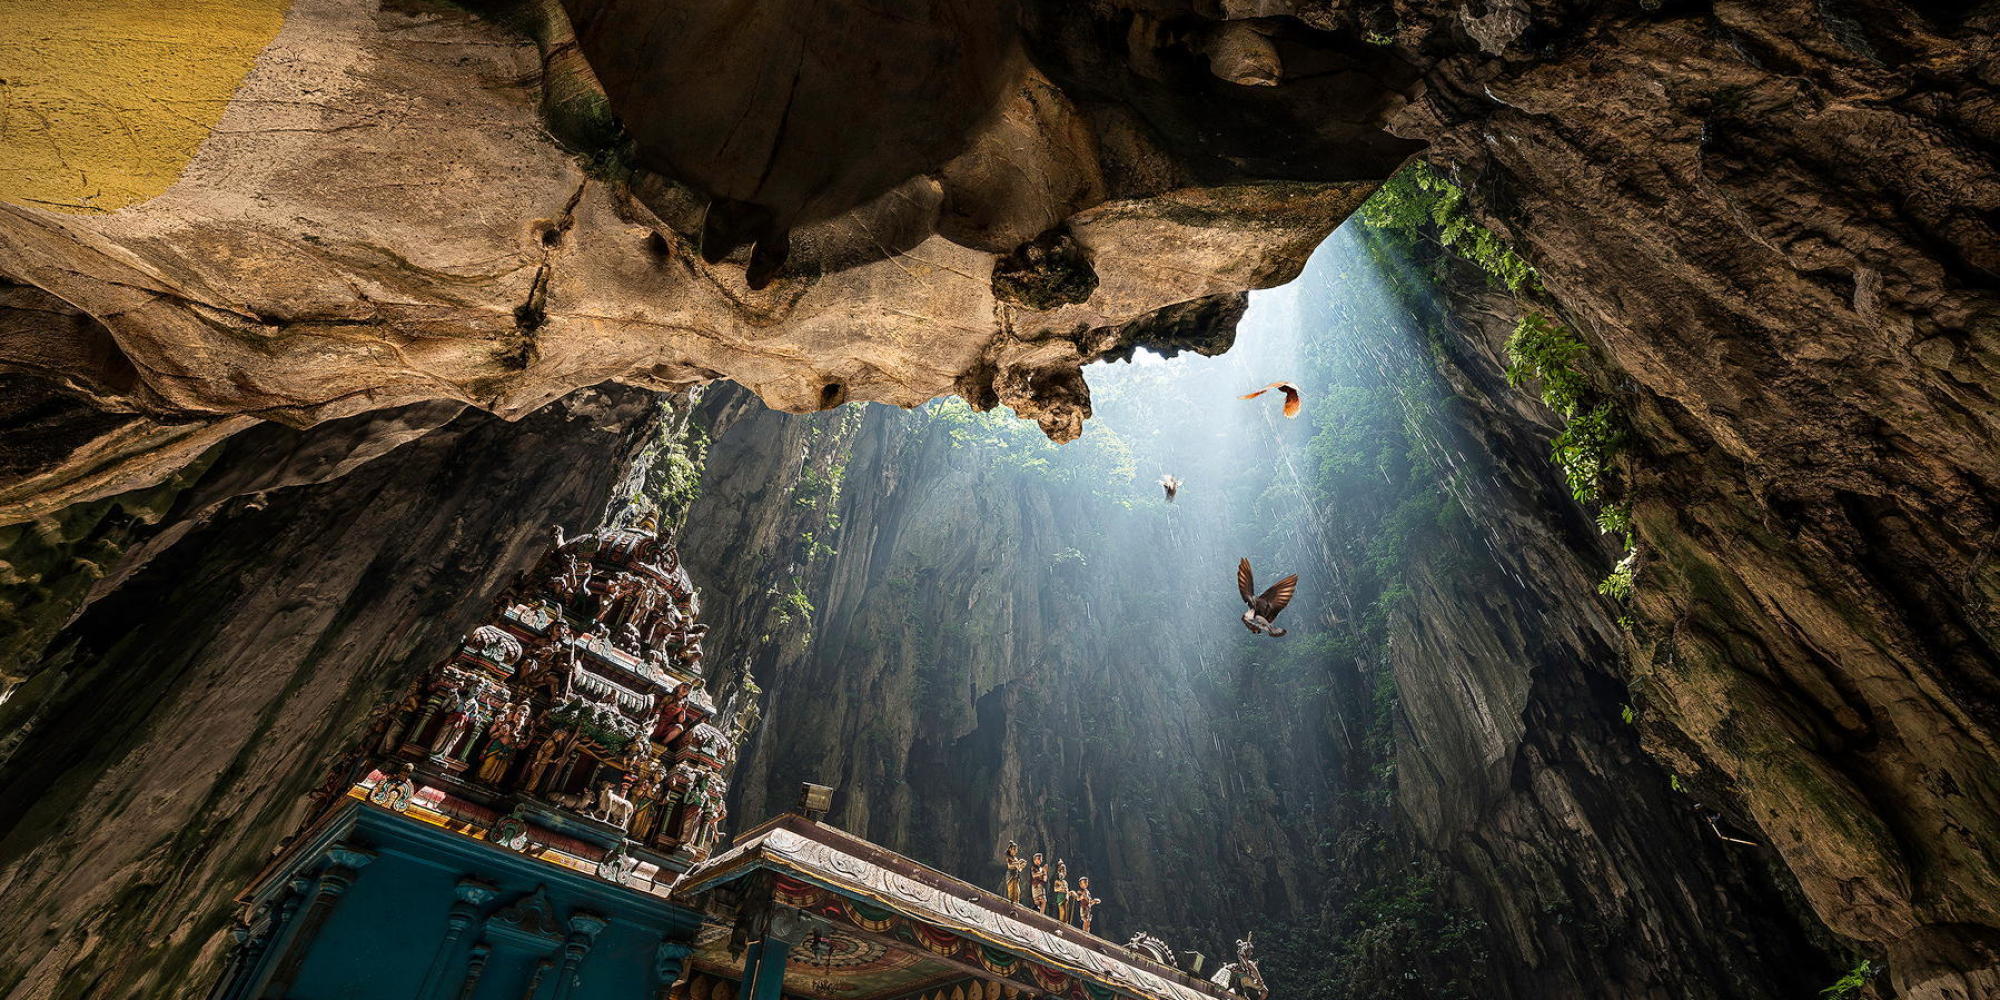 Malaysia's Batu Caves Offer Culture, Adventure And Monkeys | HuffPost